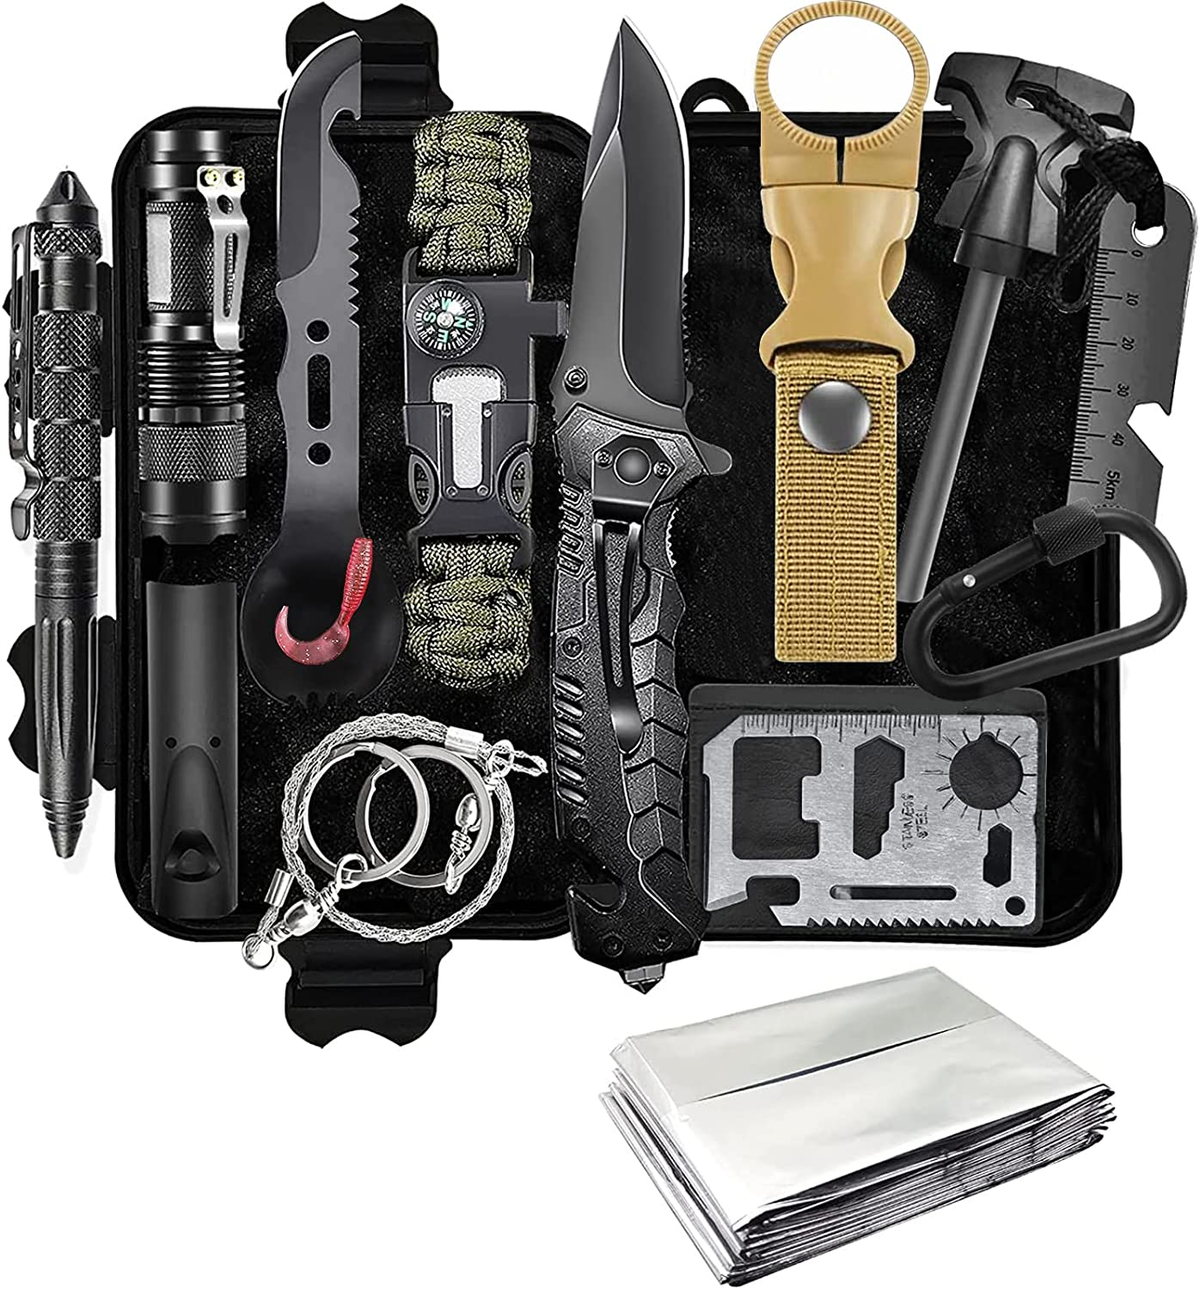 HARDLAND Survival Kit 14 in 1, Survival Gear and Equipment